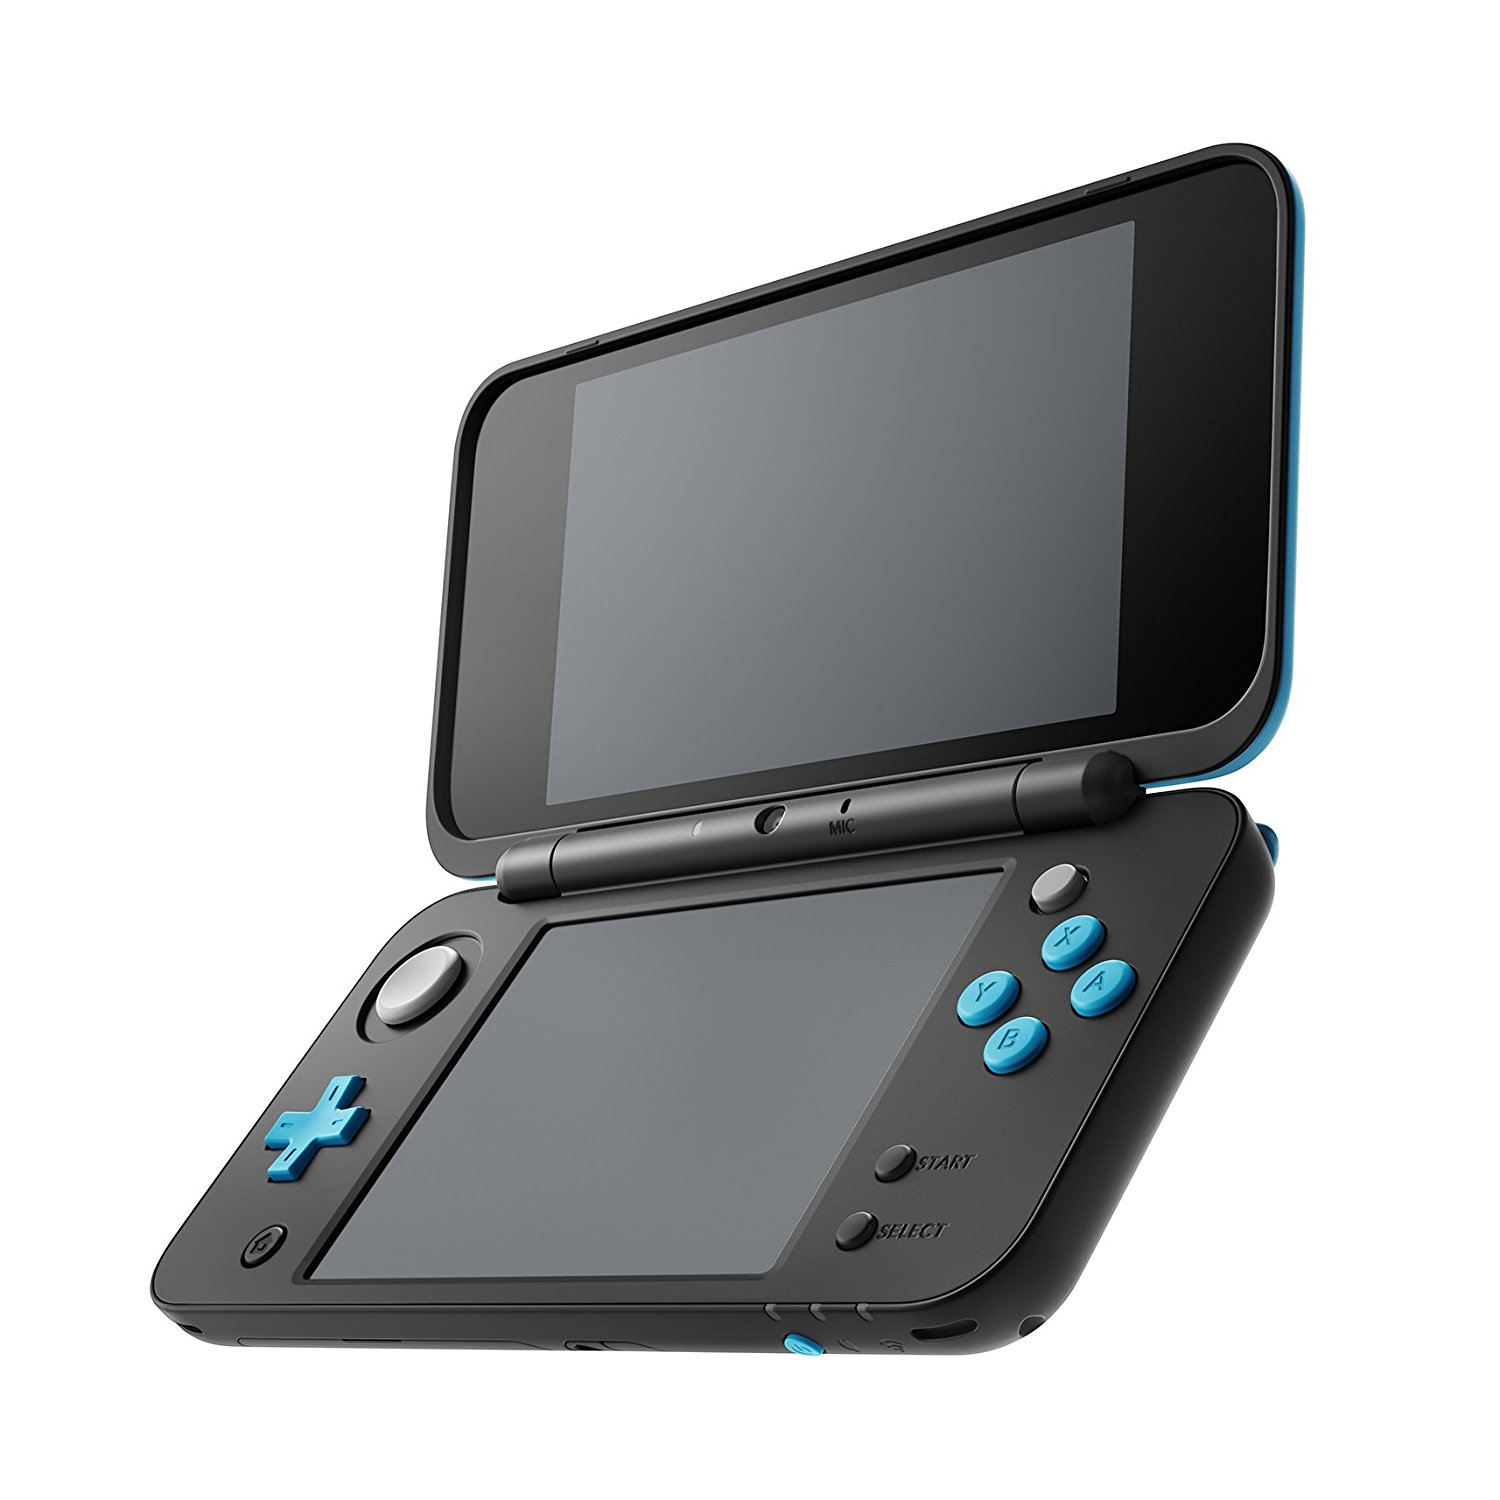 nintendo 3ds year it came out